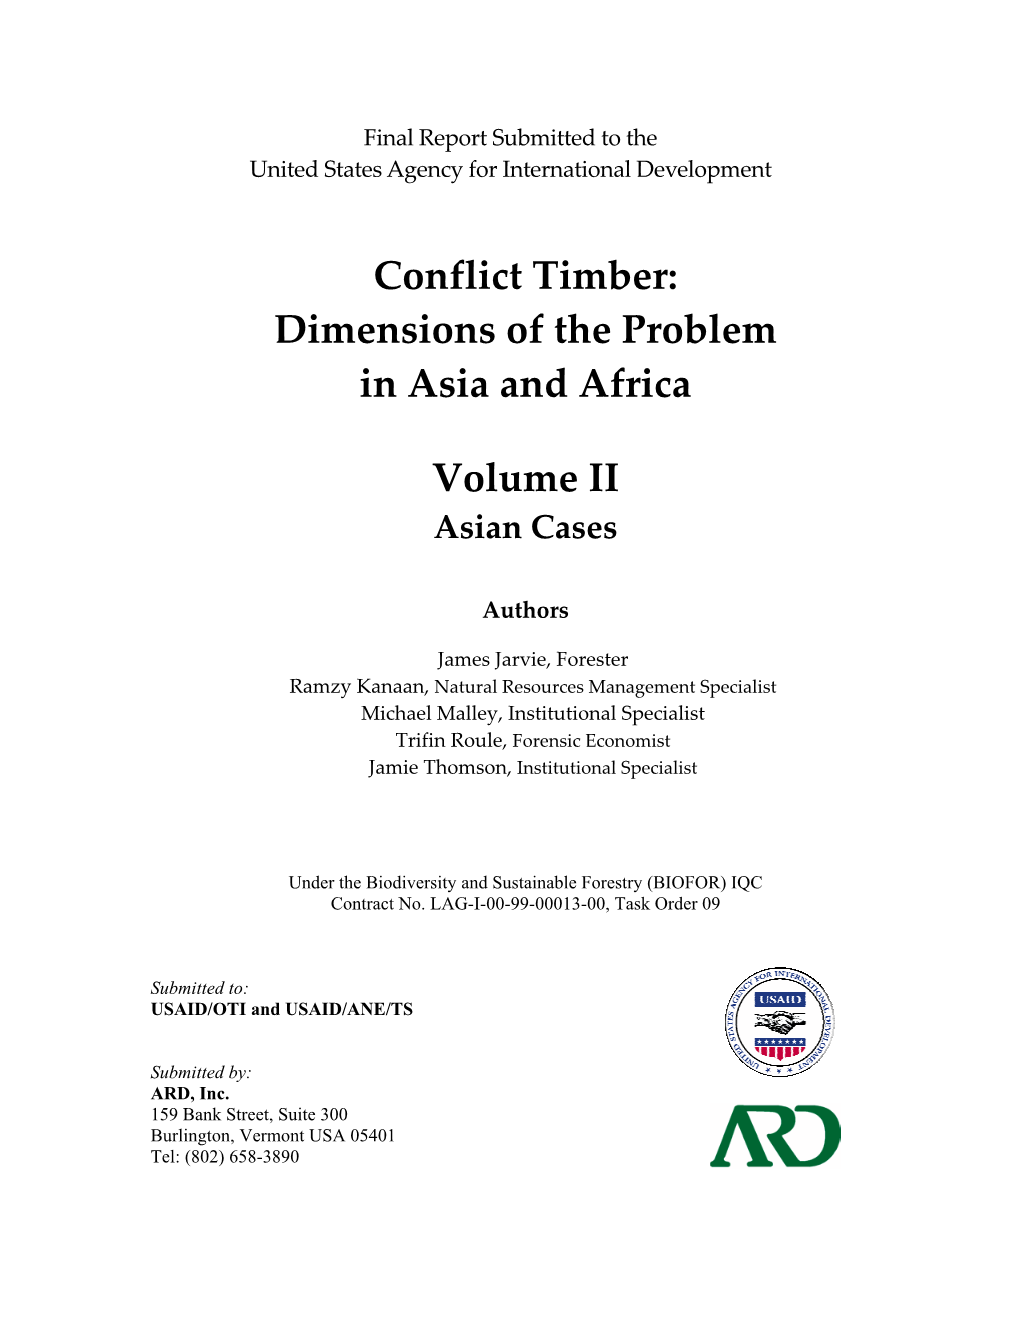 Conflict Timber: Dimensions of the Problem in Asia and Africa Volume II Table of Contents